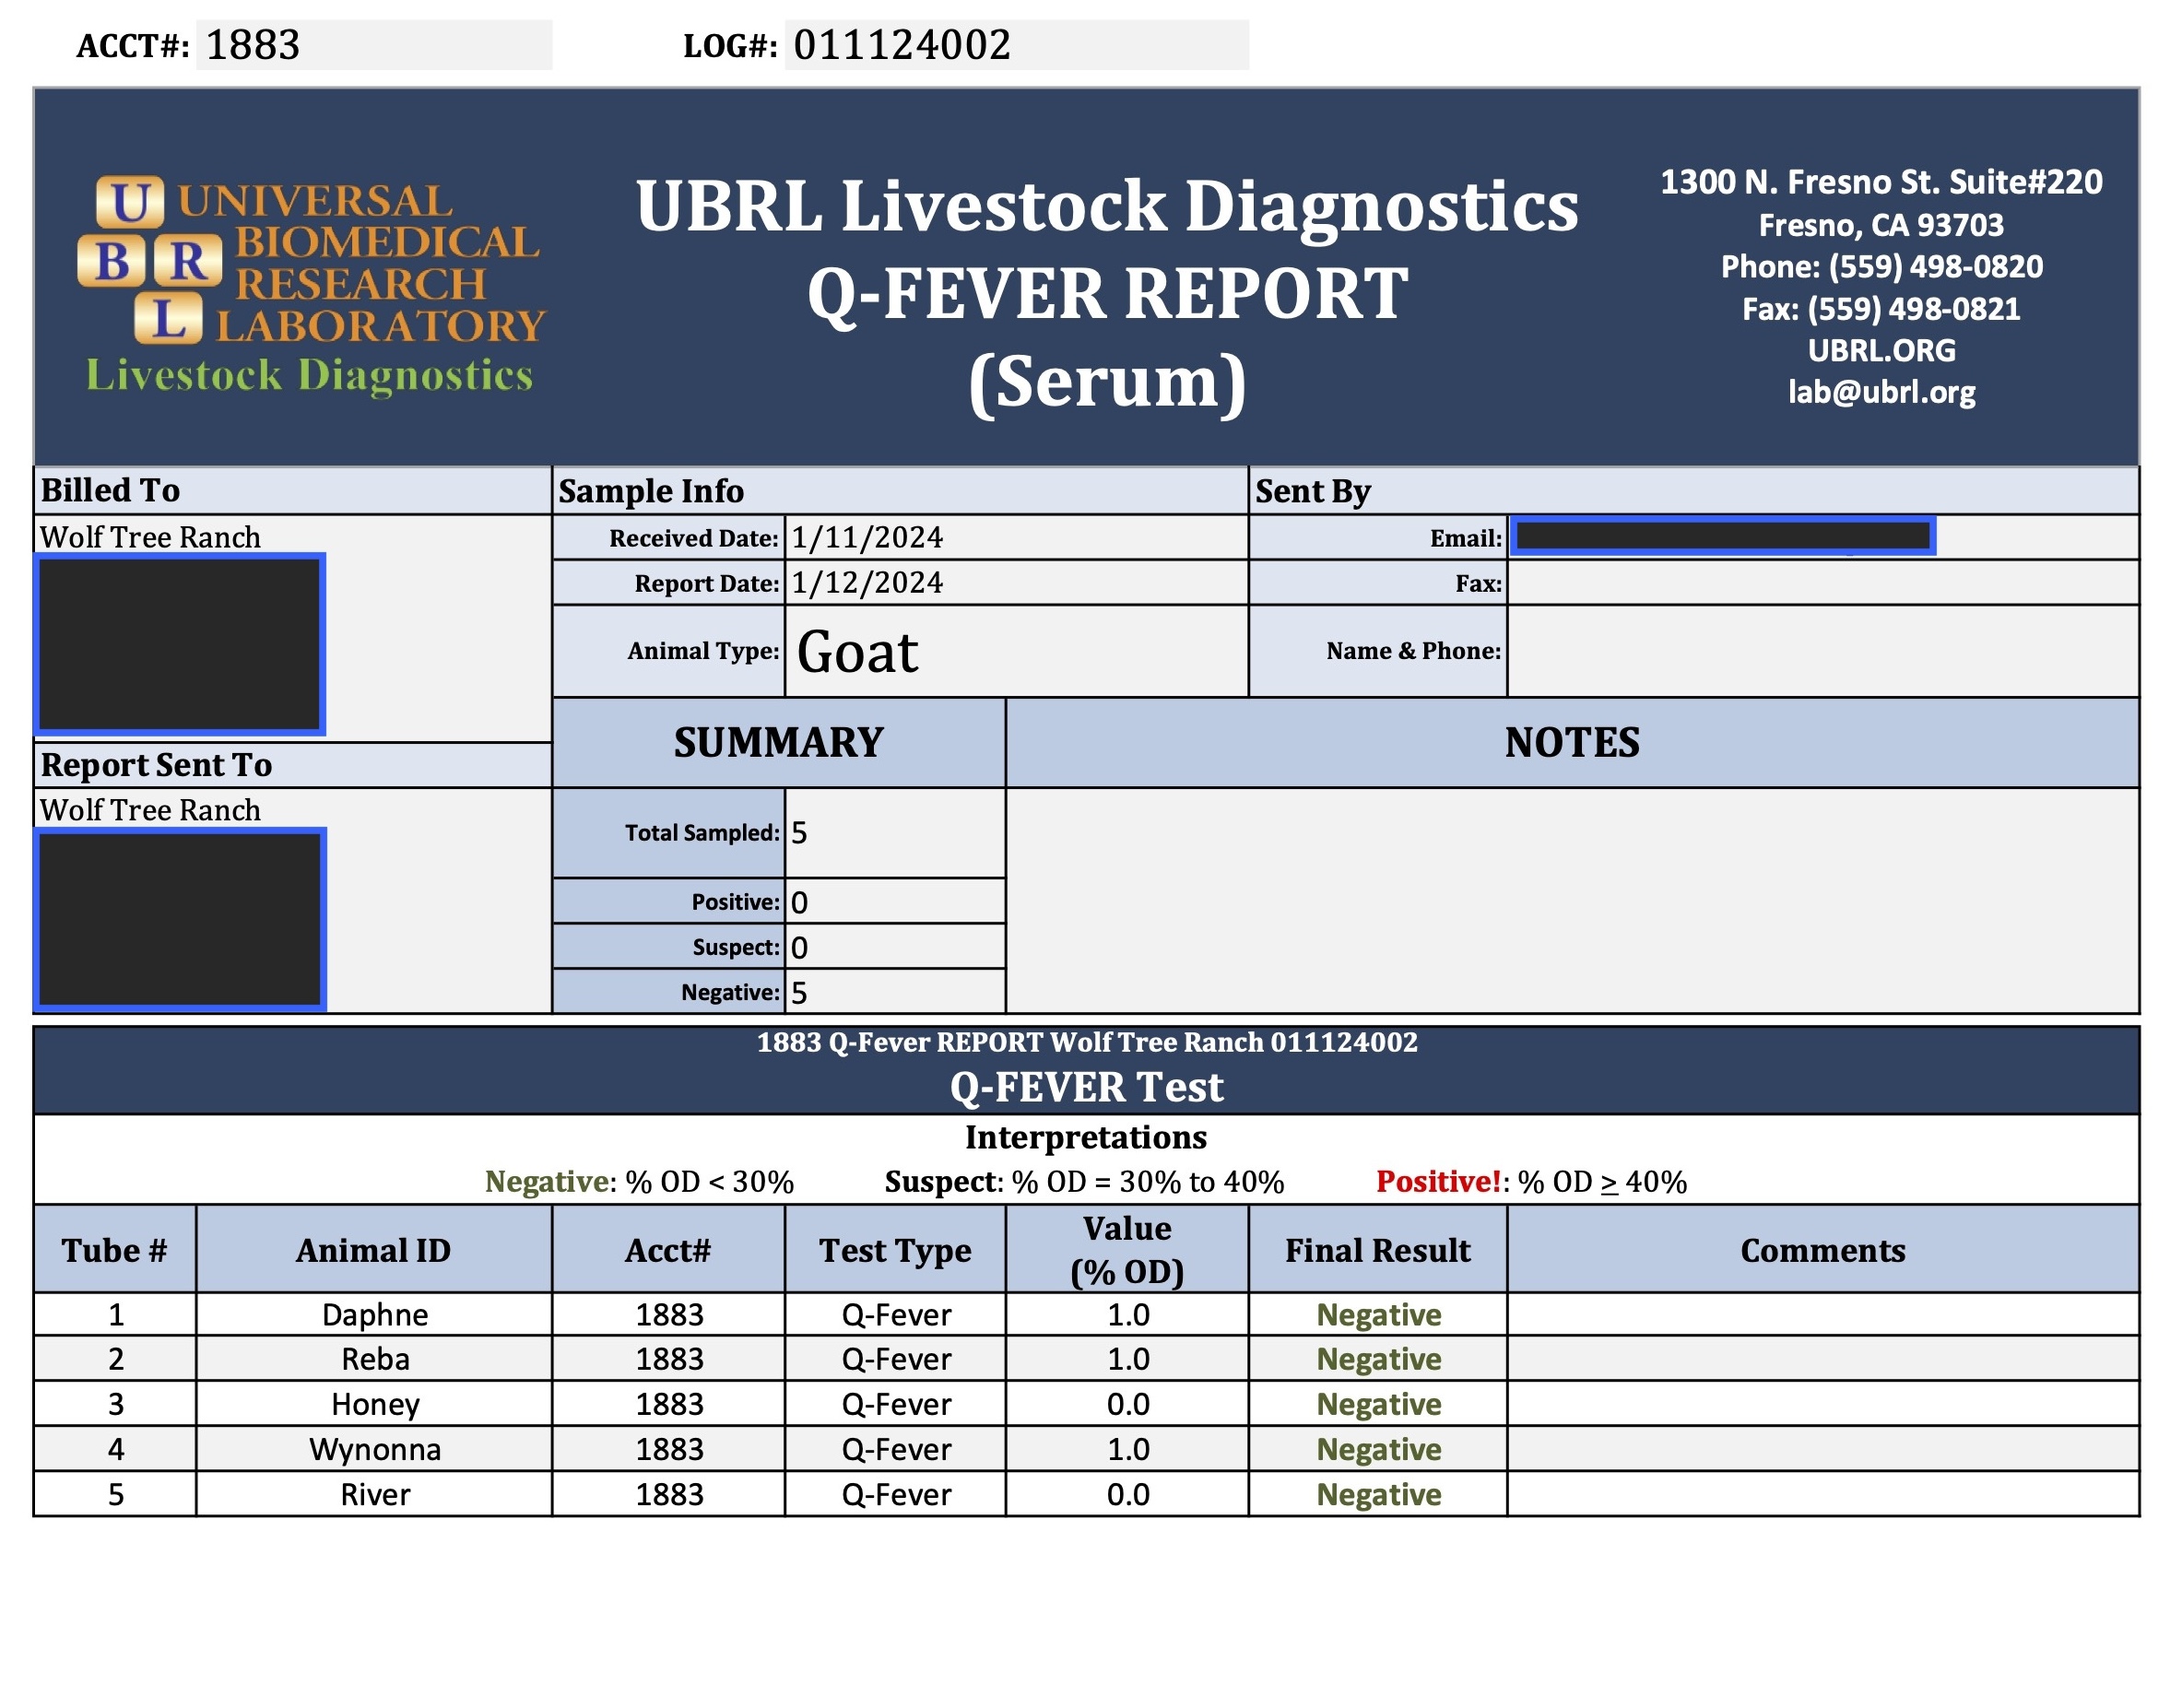 Q-Fever REPORT Wolf Tree Ranch